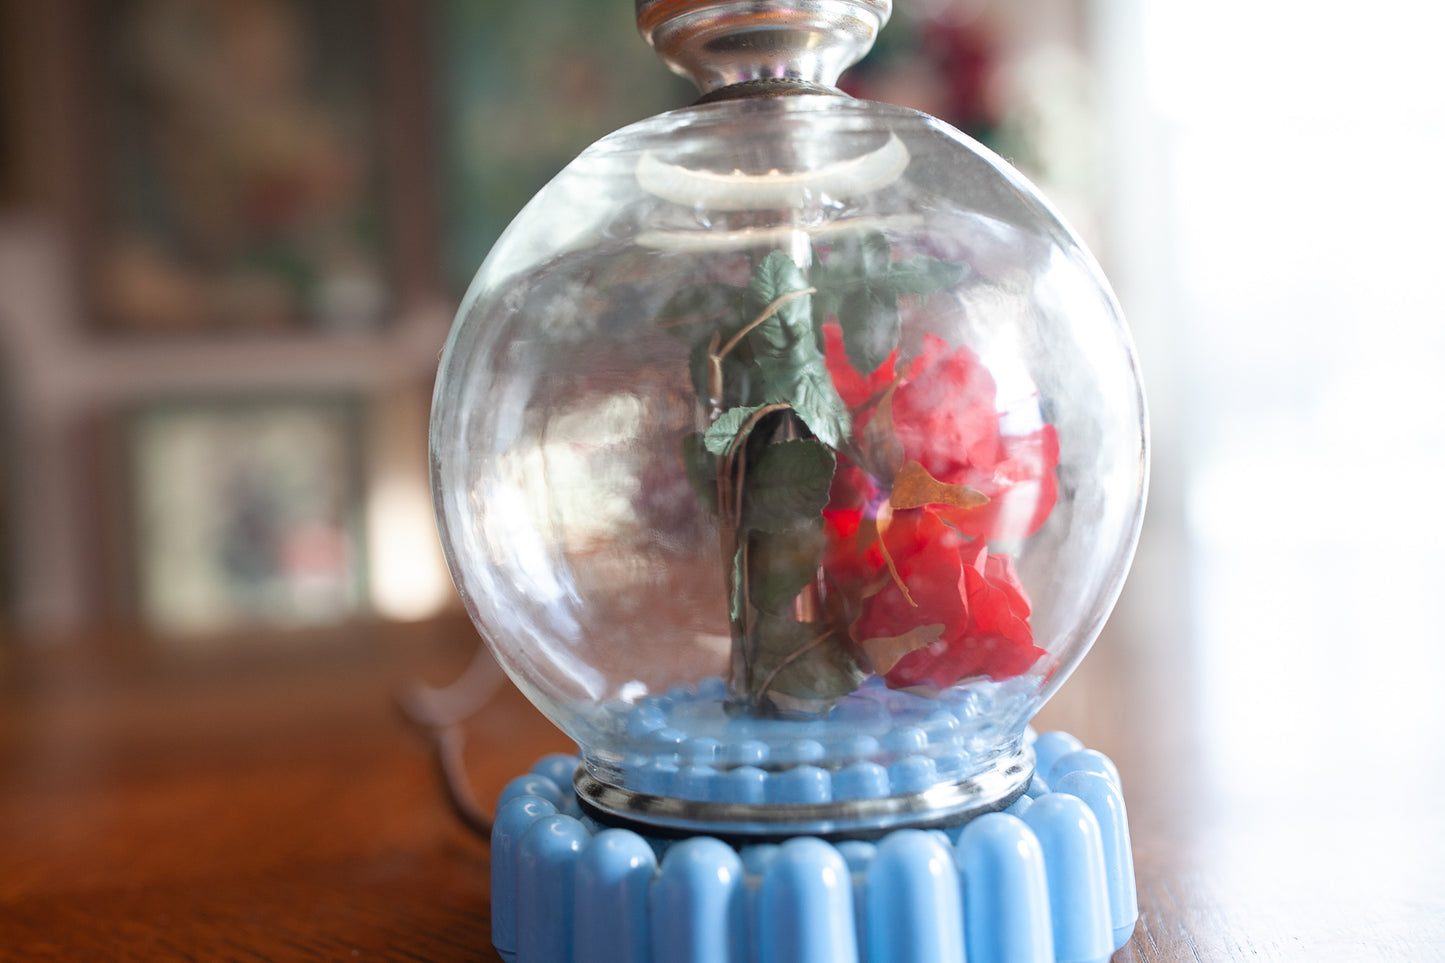 Blue Accent Lamp- Vintage Lamp - Vintage Glass Lamp with flowers